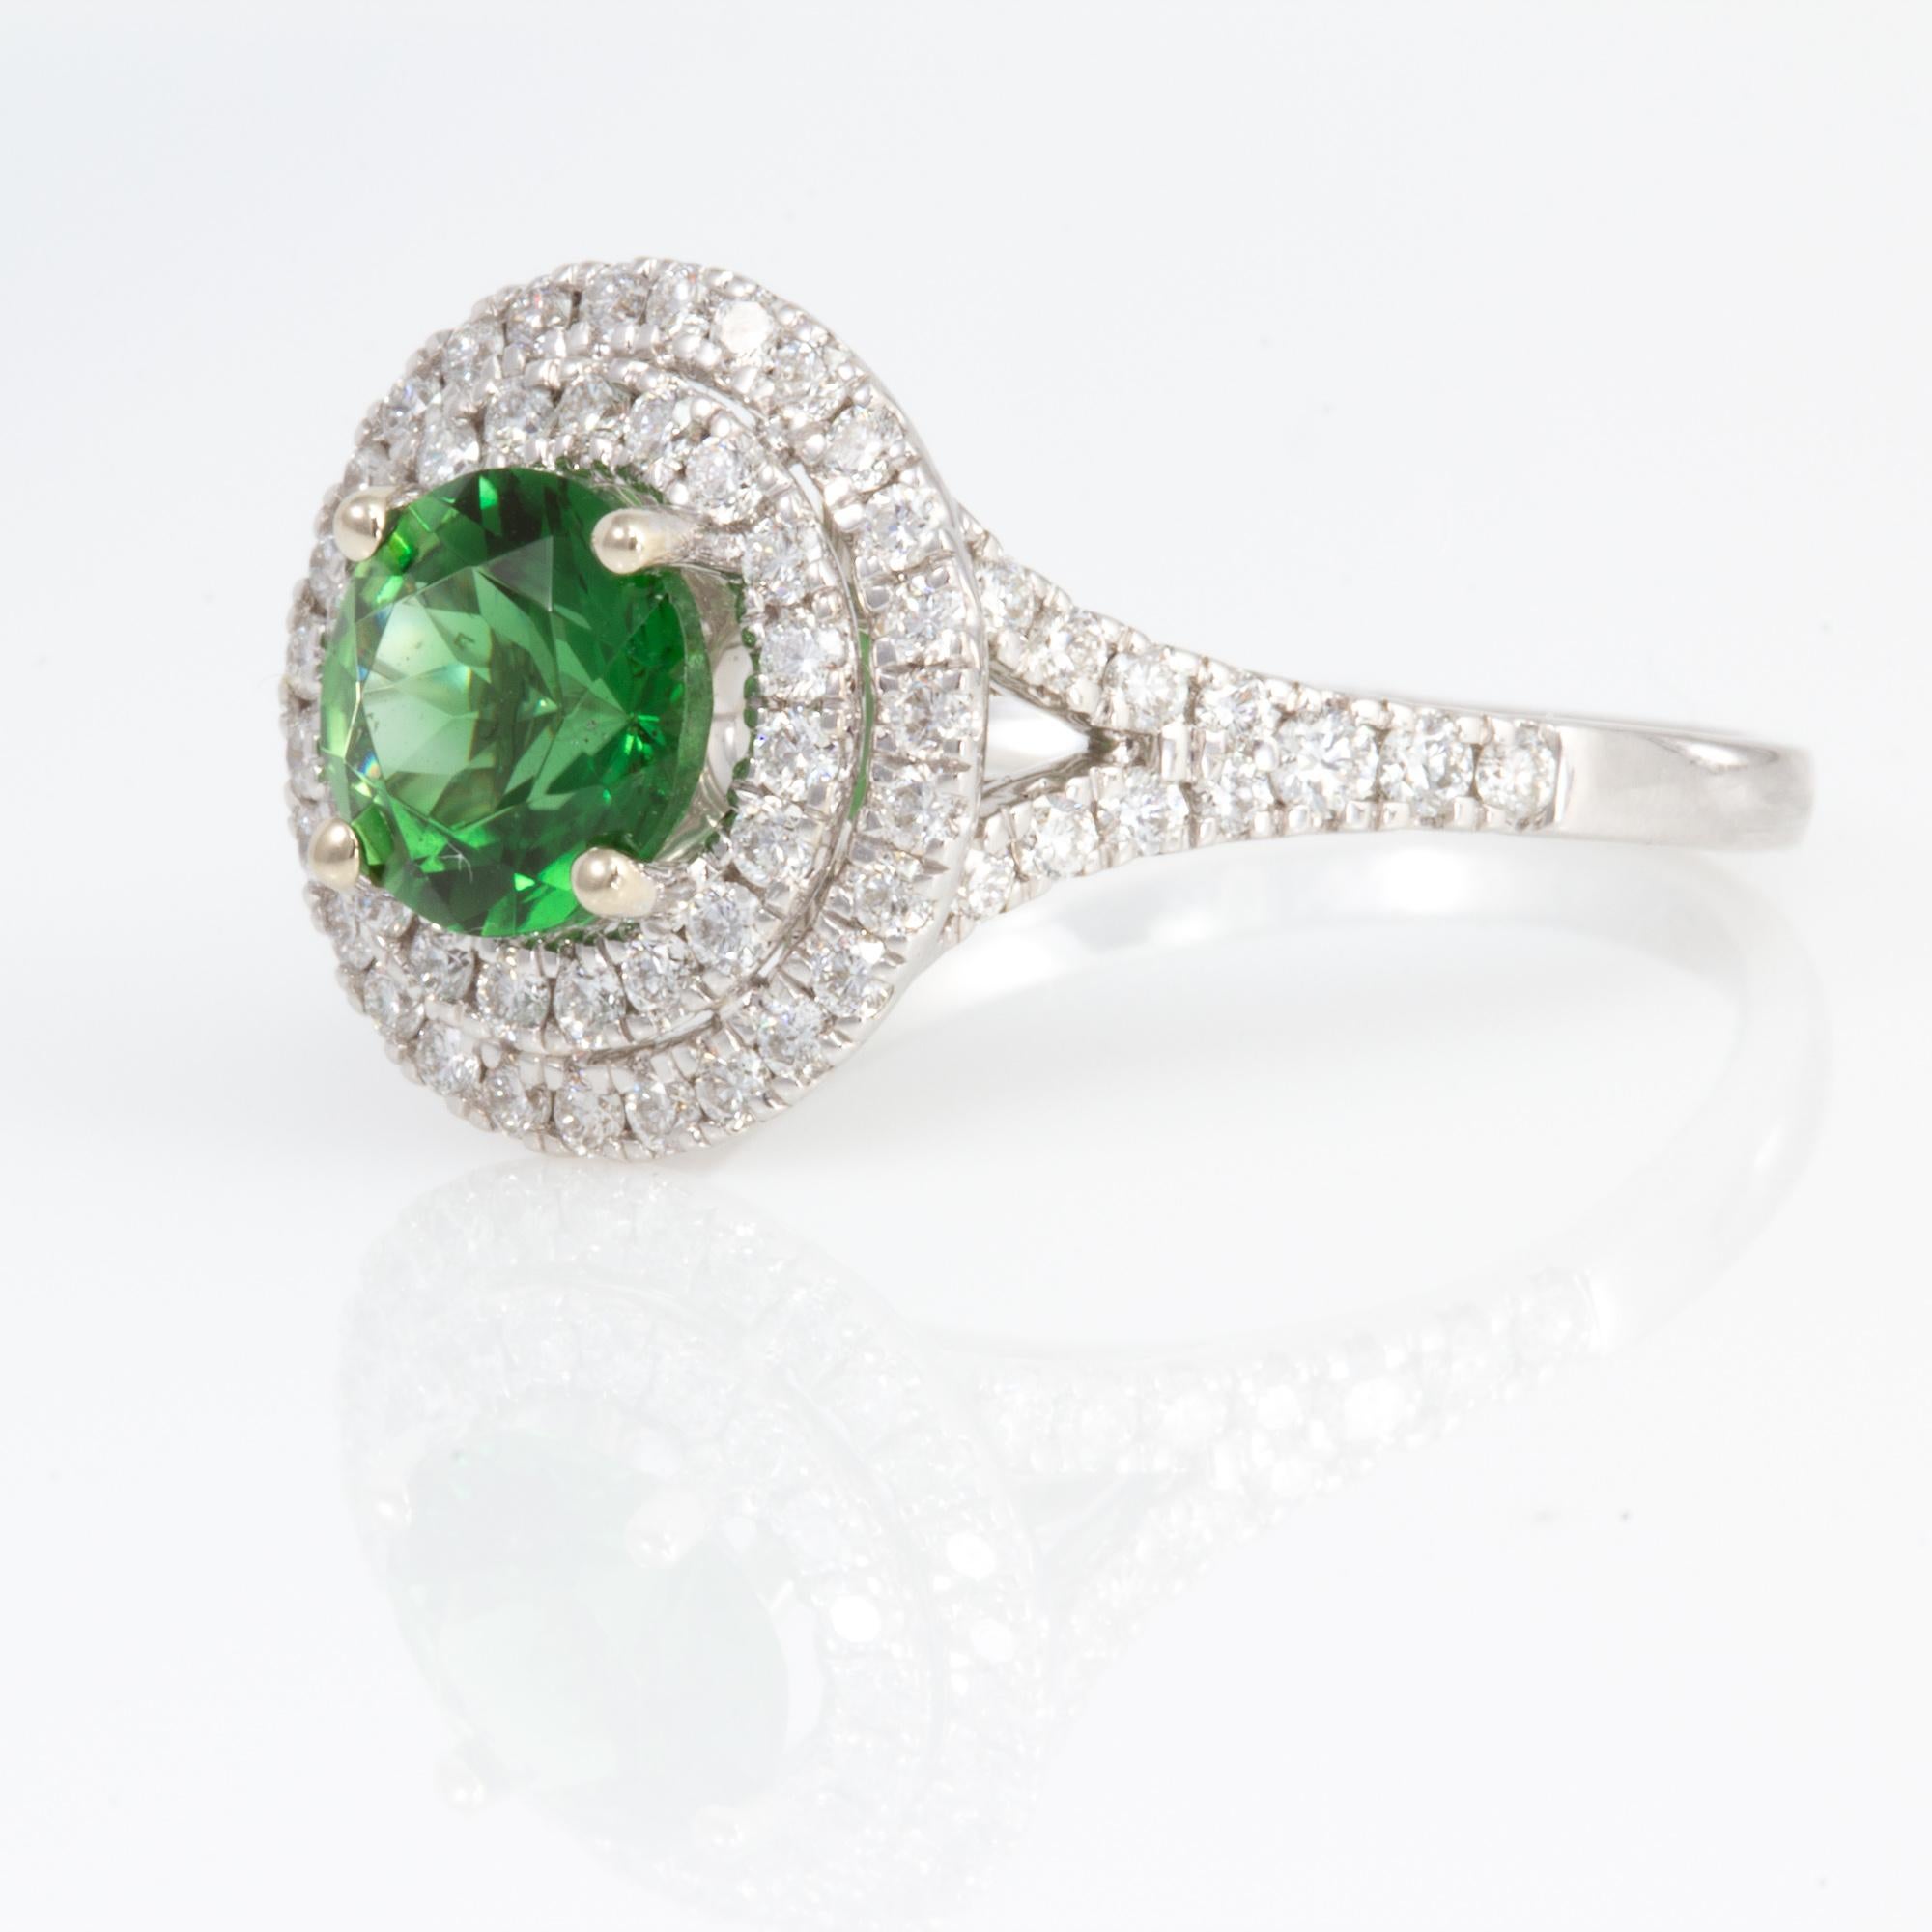 Exceptionally Well Cut 1.26 Carat Chrome Tourmaline and Diamond Ring For Sale 4